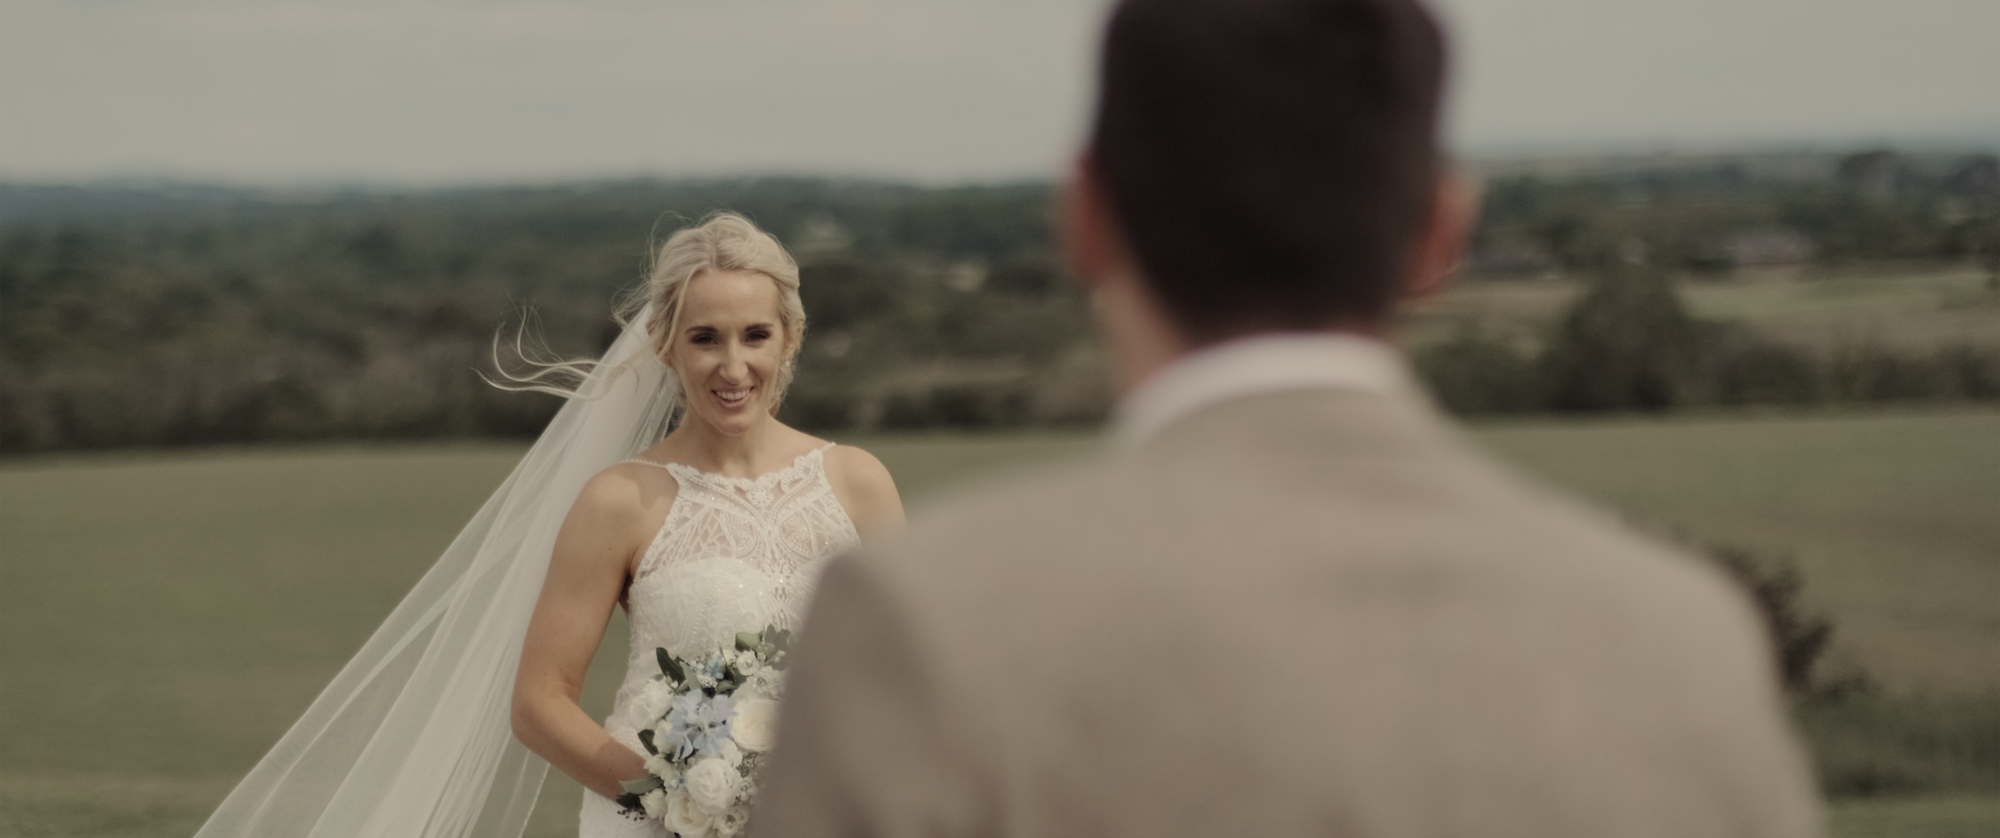 Oxwich Bay Hotel Wedding Videography by Ben Holbrook Films (Swansea South Wales).jpeg31.png